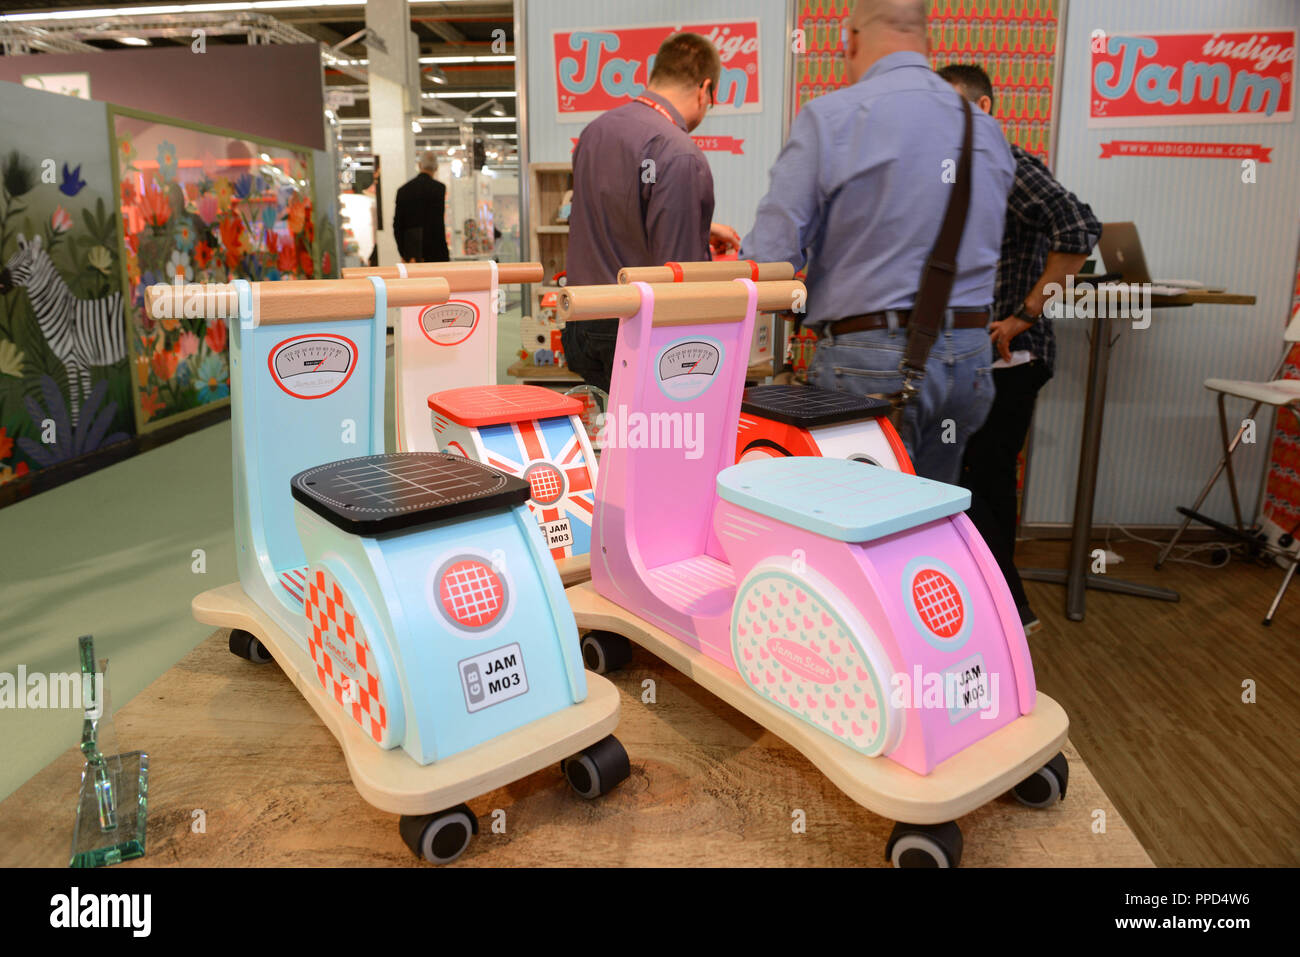 Stand of the British company Indigo Jamm at the Toy Fair in Nuremberg. Stock Photo